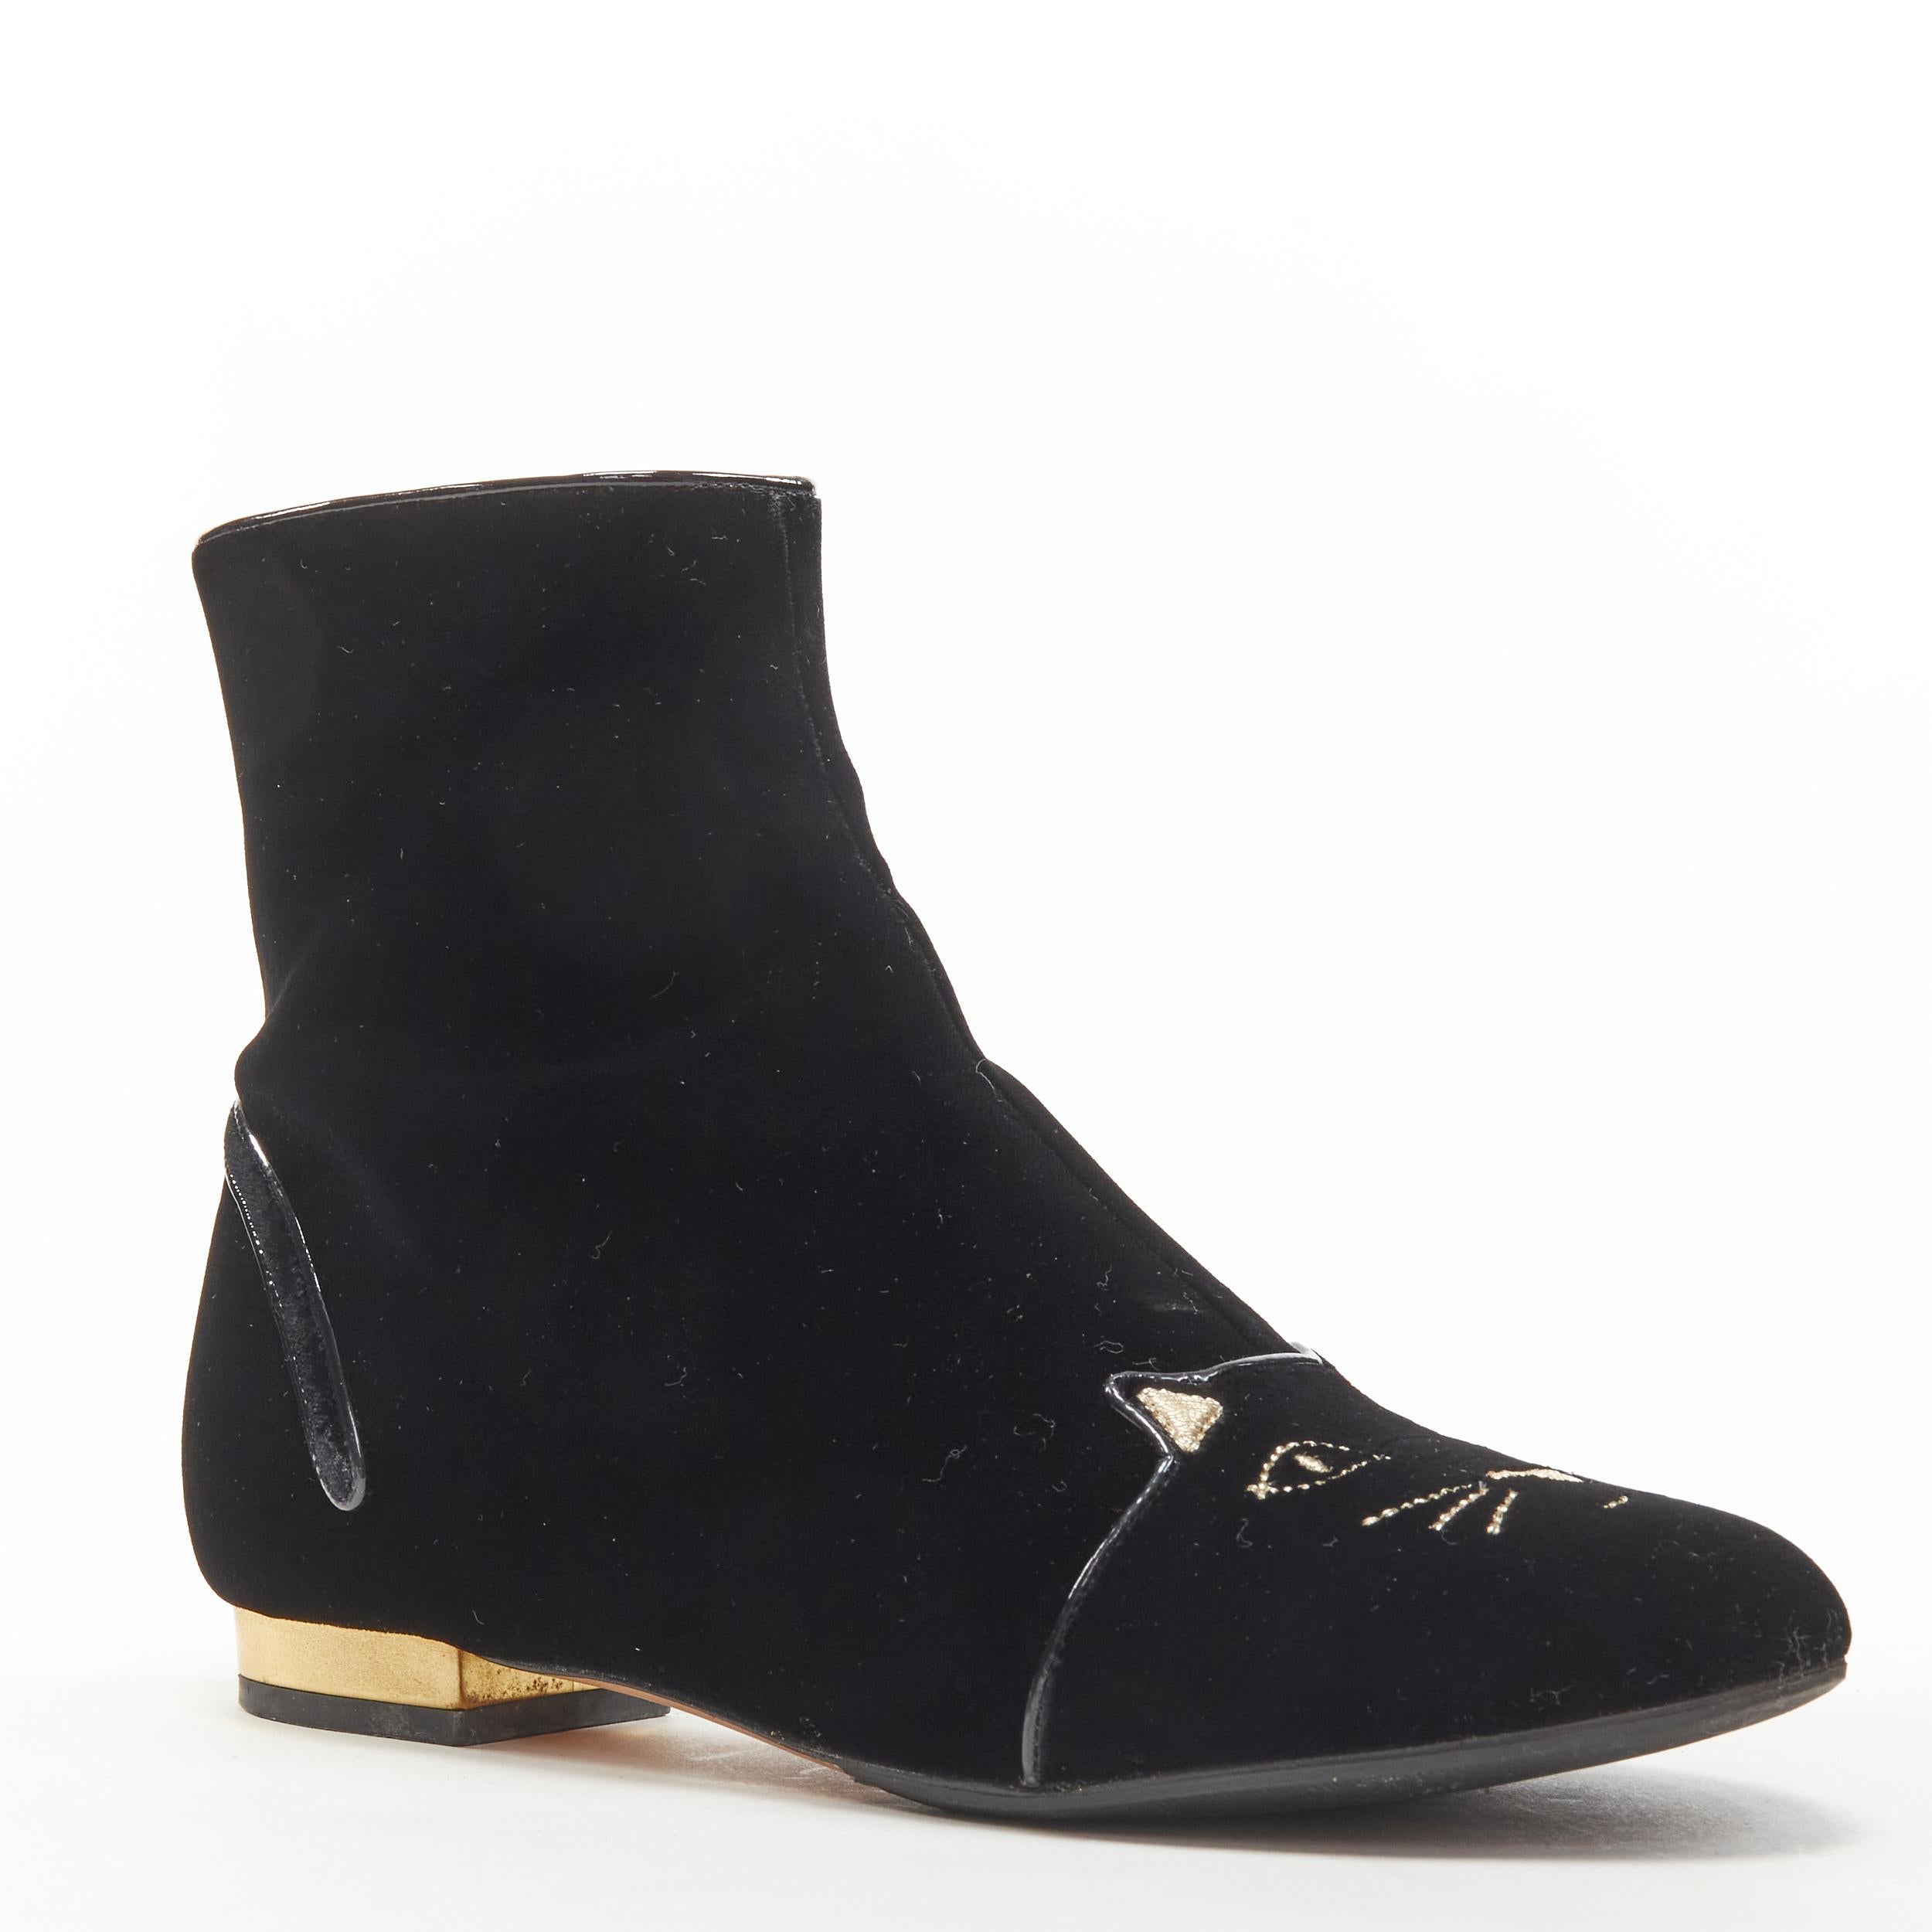 CHARLOTTE OLYMPIA Puss In Boots black velvet Kitty embroidery ankle boot EU36.5 
Reference: ANWU/A00174 
Brand: Charlotte Olympia 
Material: Velvet 
Color: Black 
Pattern: Solid 
Closure: Zip 
Extra Detail: Gold leather wrapped heel. 
Made in: Italy